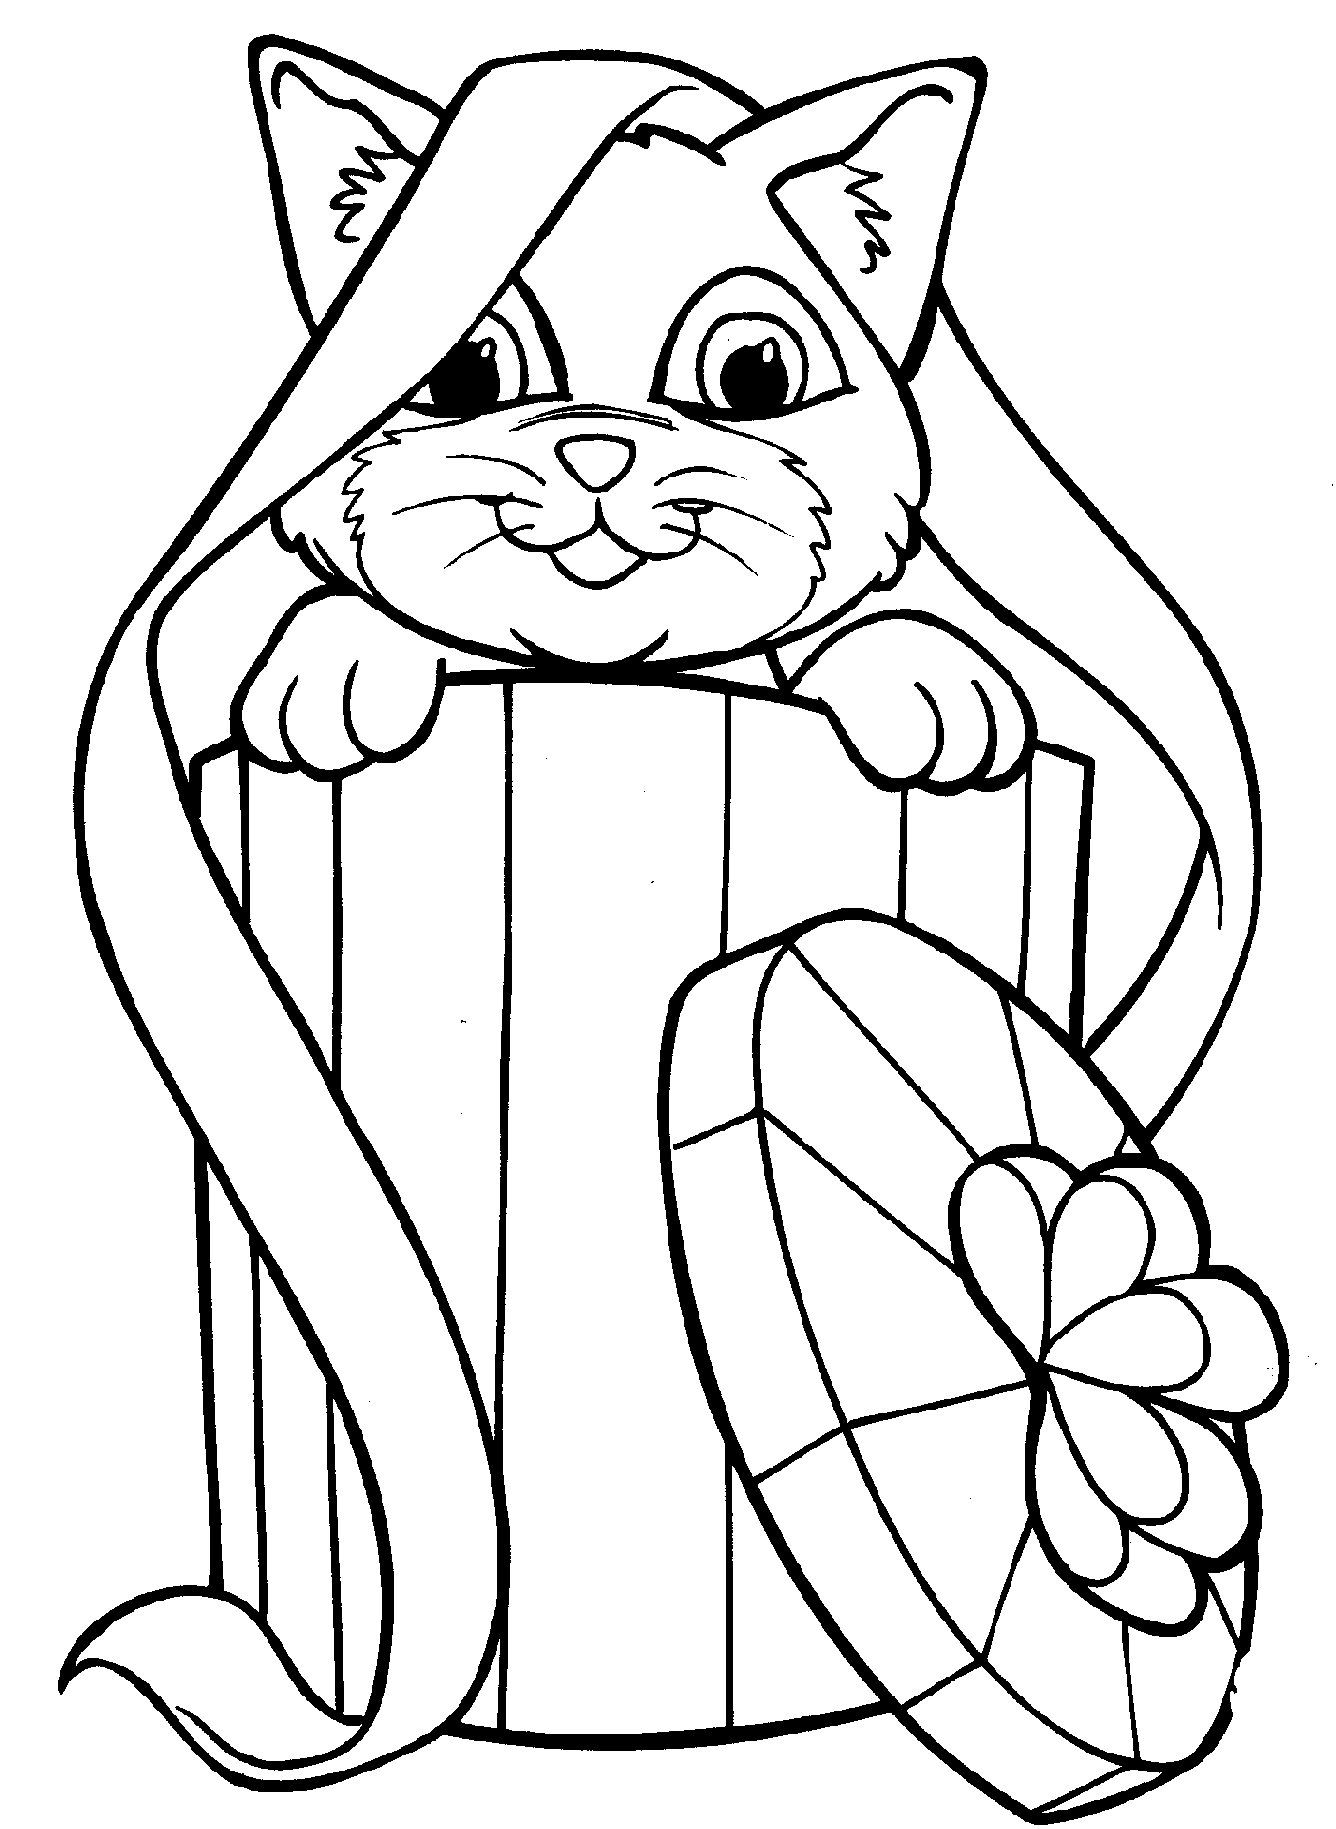 kitty cat pictures to color kitten coloring pages best coloring pages for kids to kitty color cat pictures 